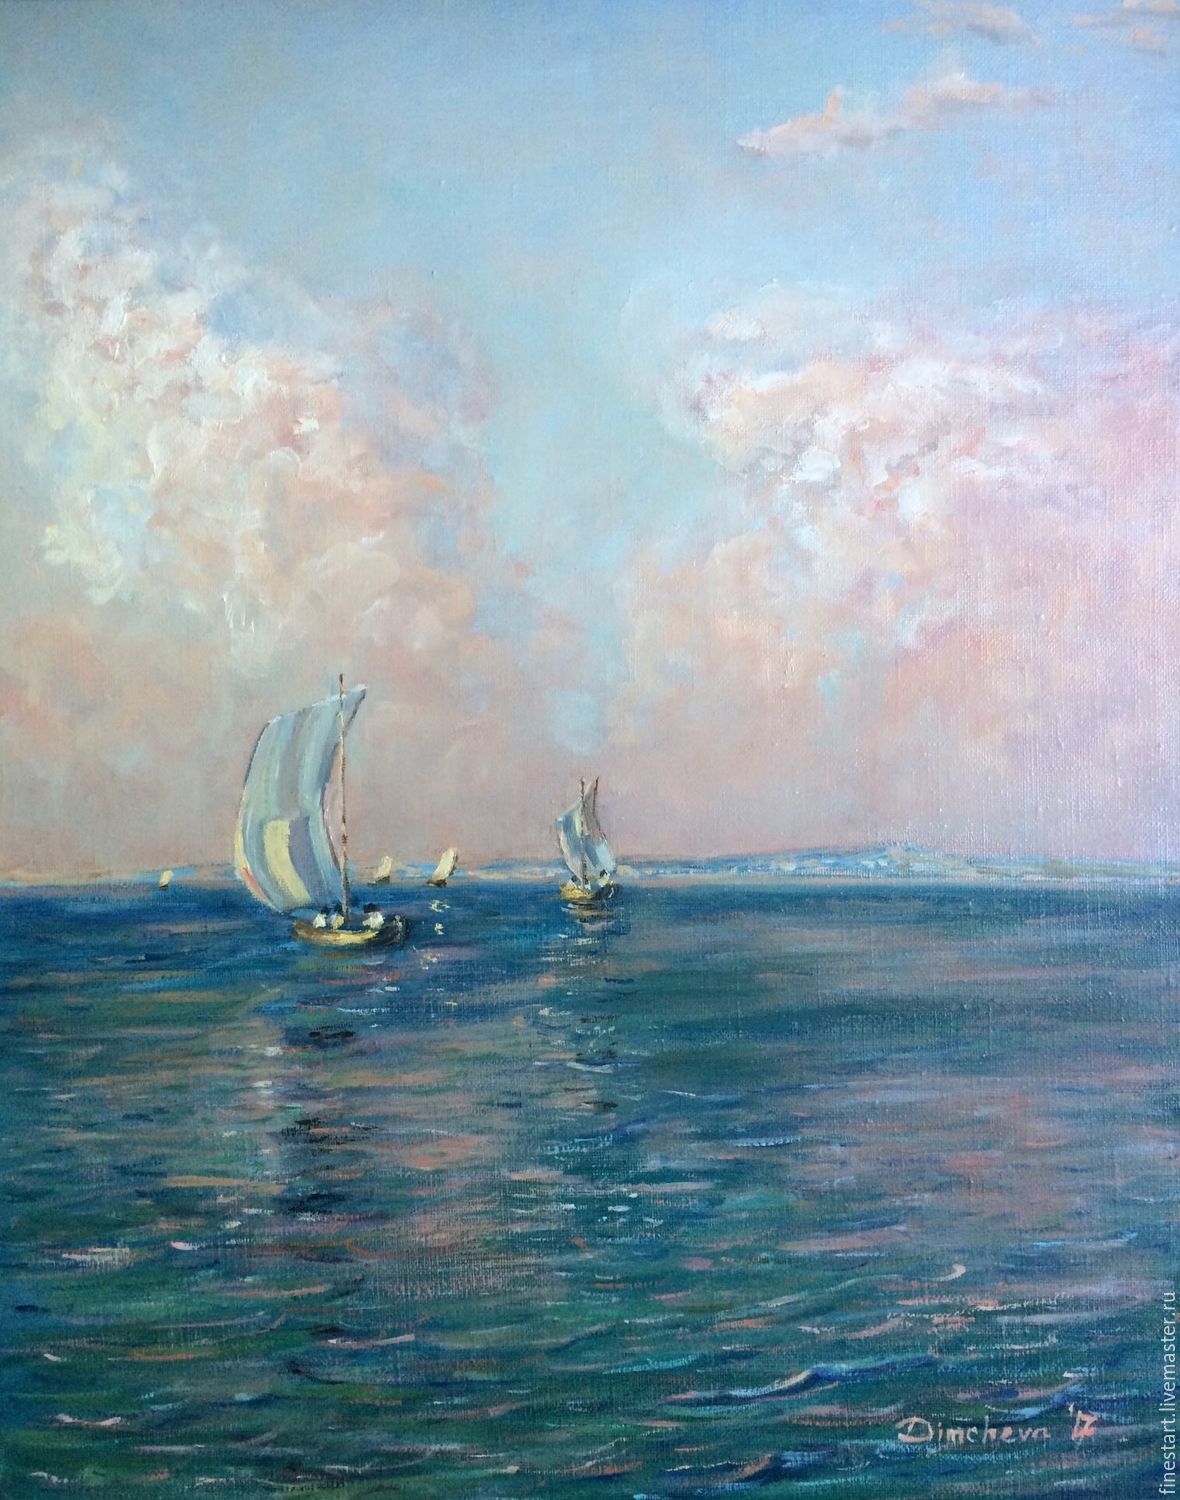 Oil painting seascape Buy oil painting Sea boat sky Buy painting sea Painting for interior
